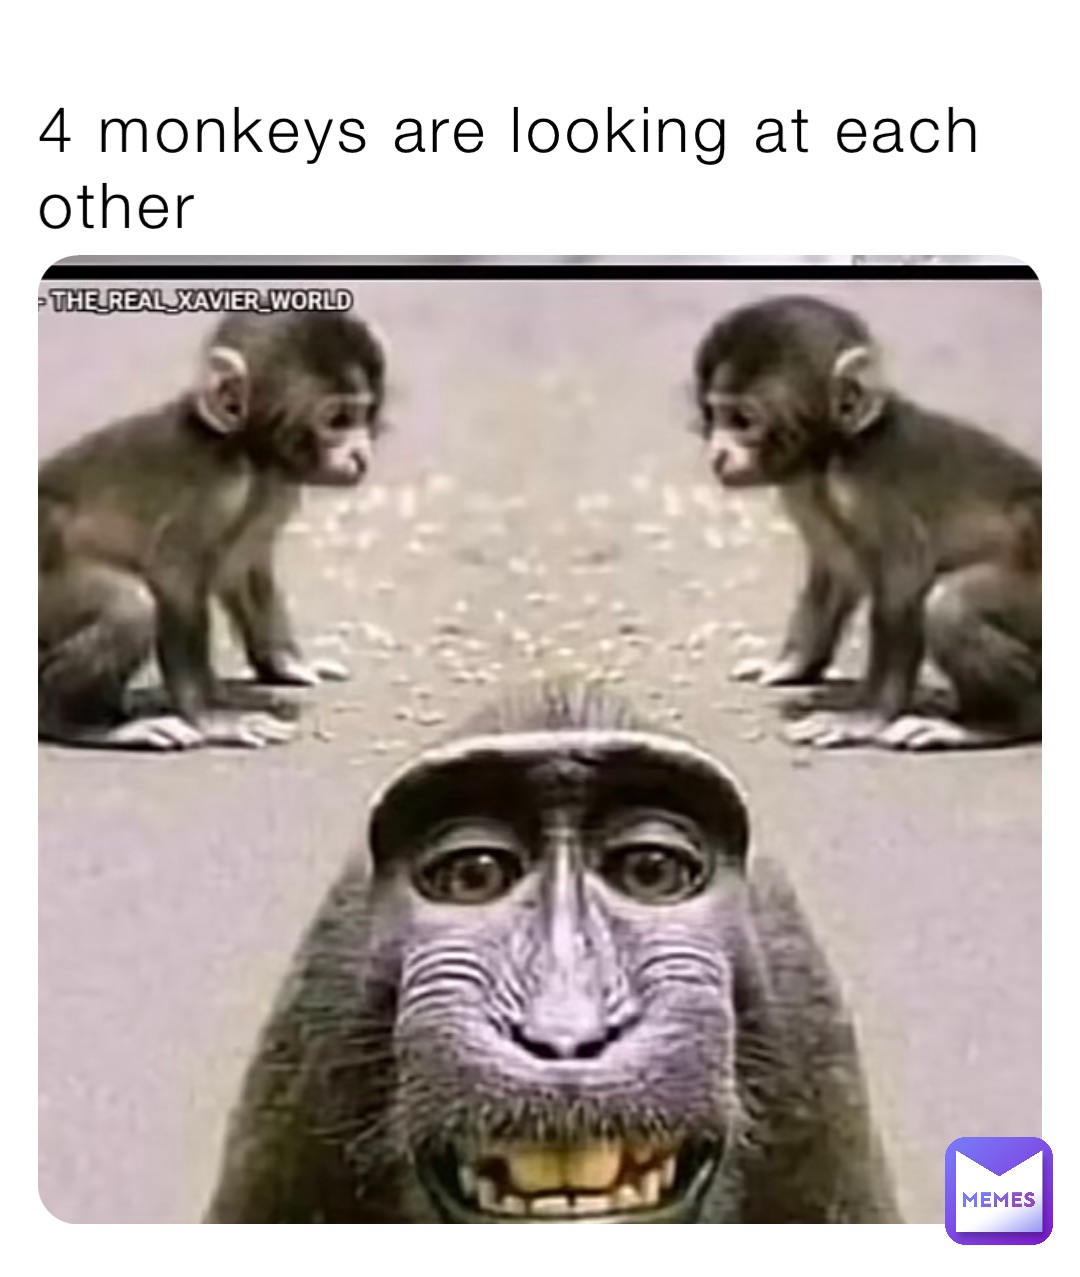 4 monkeys are looking at each other